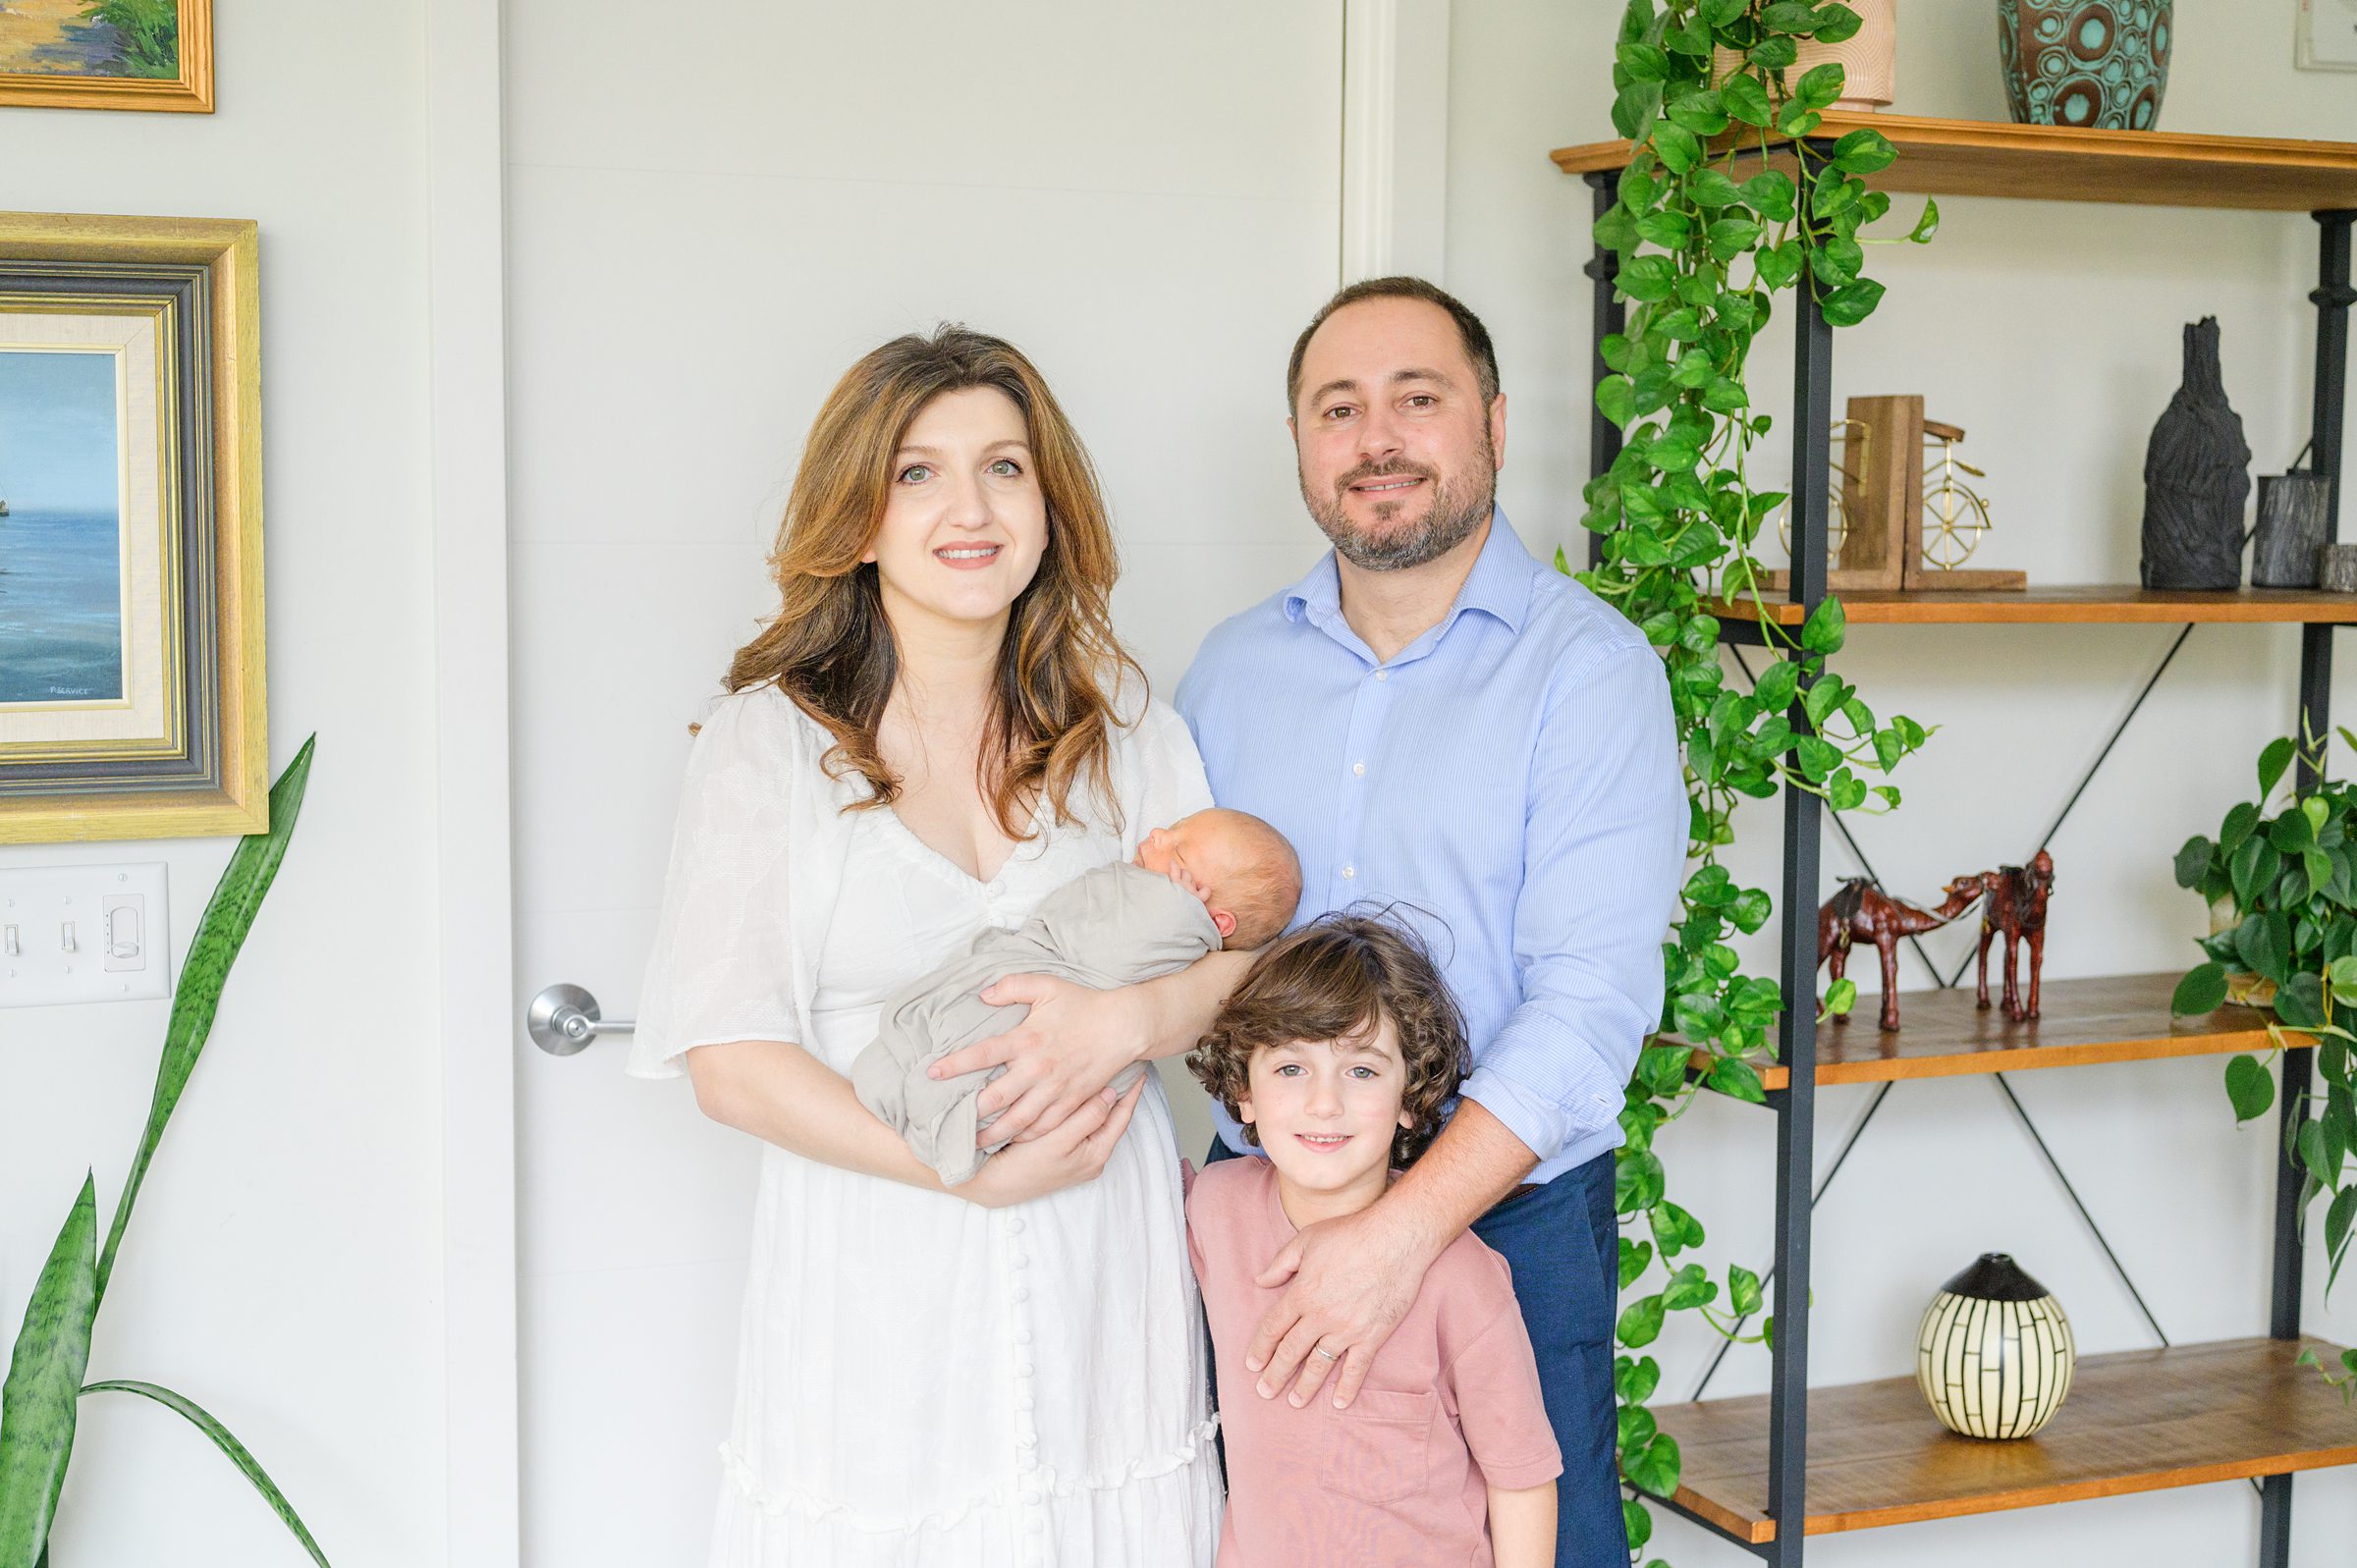 In-home newborn and family portrait session in Washington, D.C. photographed by Lifestyle Newborn Photographer Cait Kramer Photography.